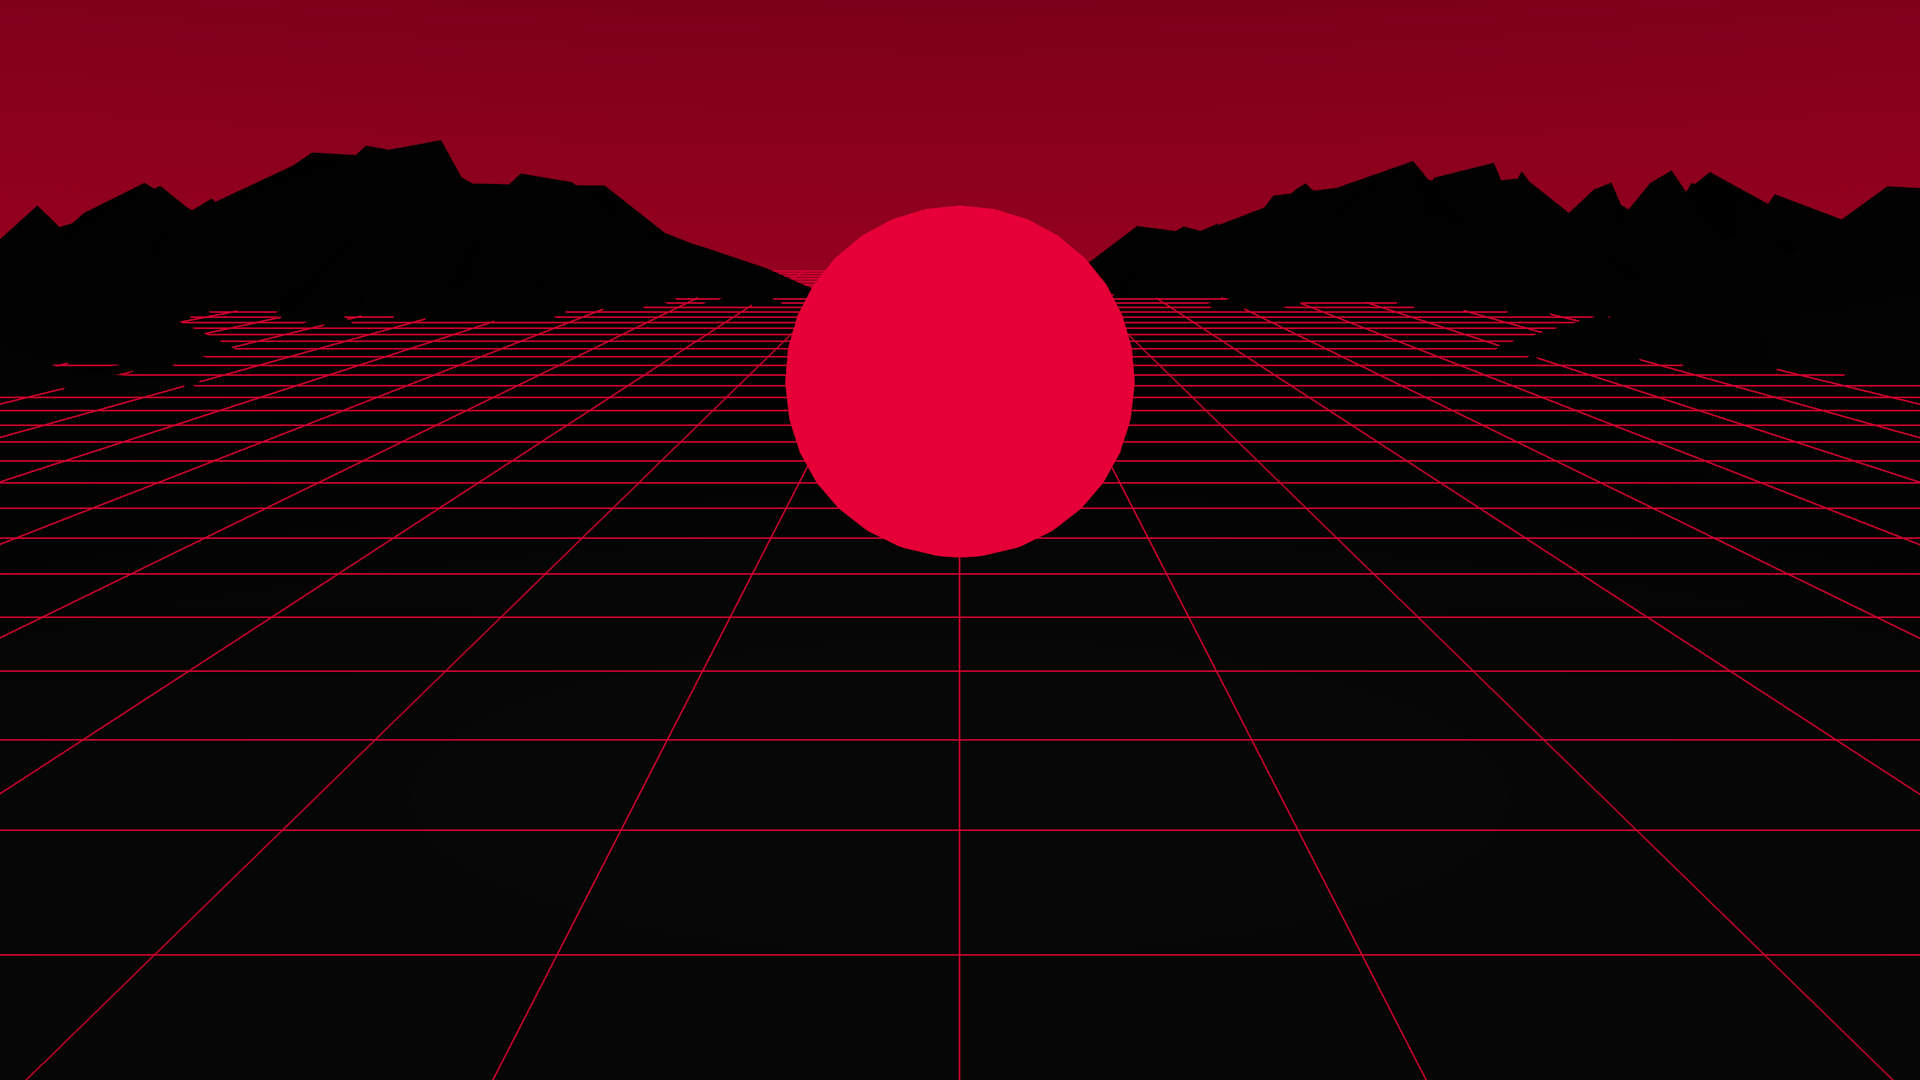 A black and red poster with mountains in the background - 80s